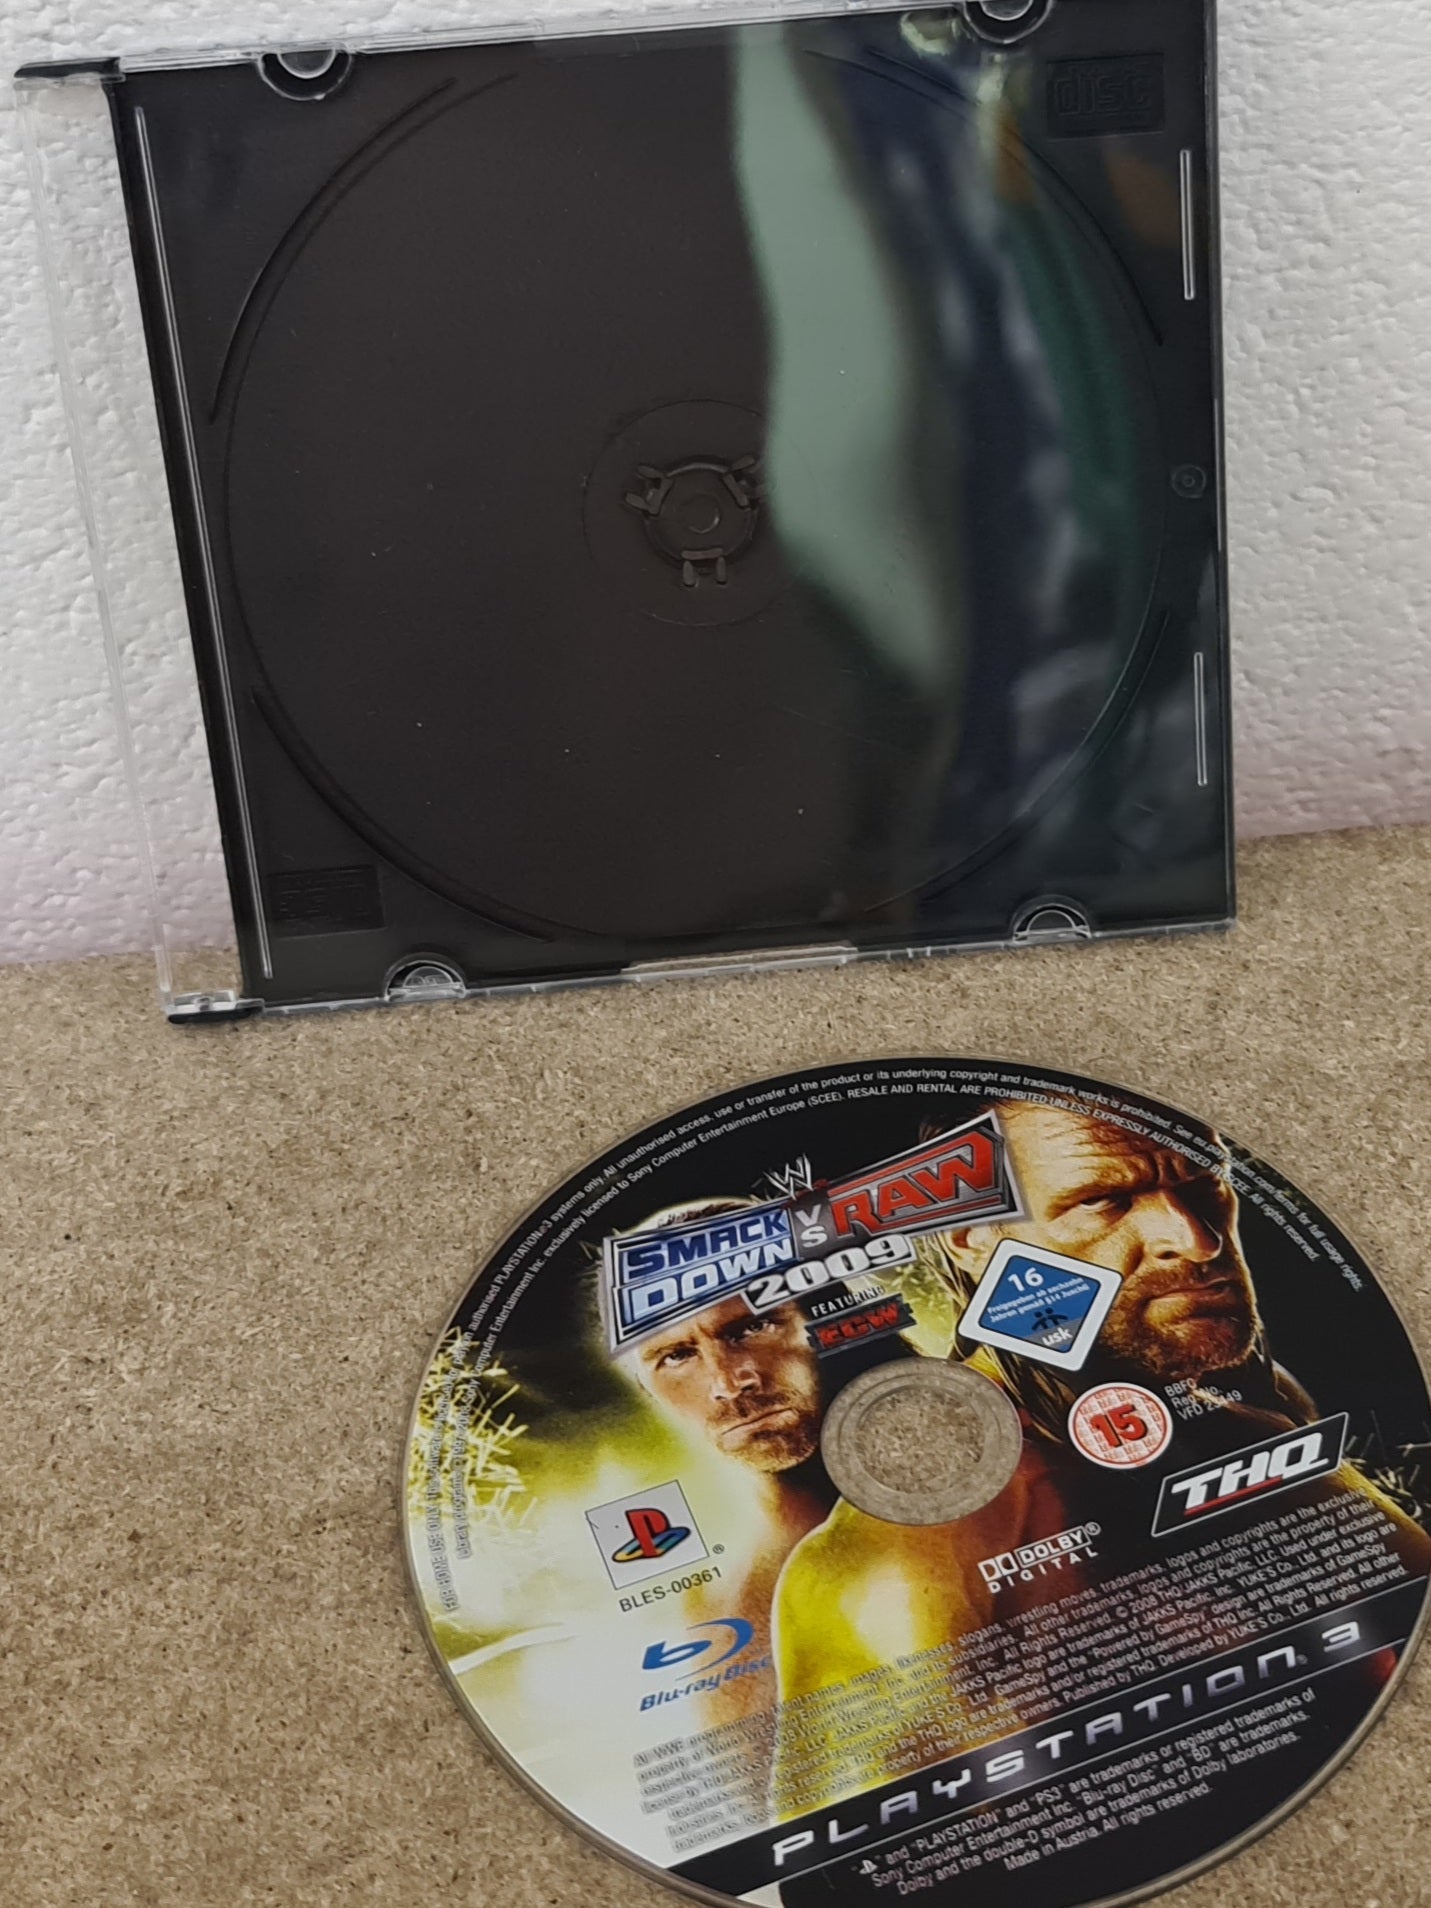 WWE Smackdown VS Raw 2009 Sony Playstation 3 (PS3) Game Disc Only